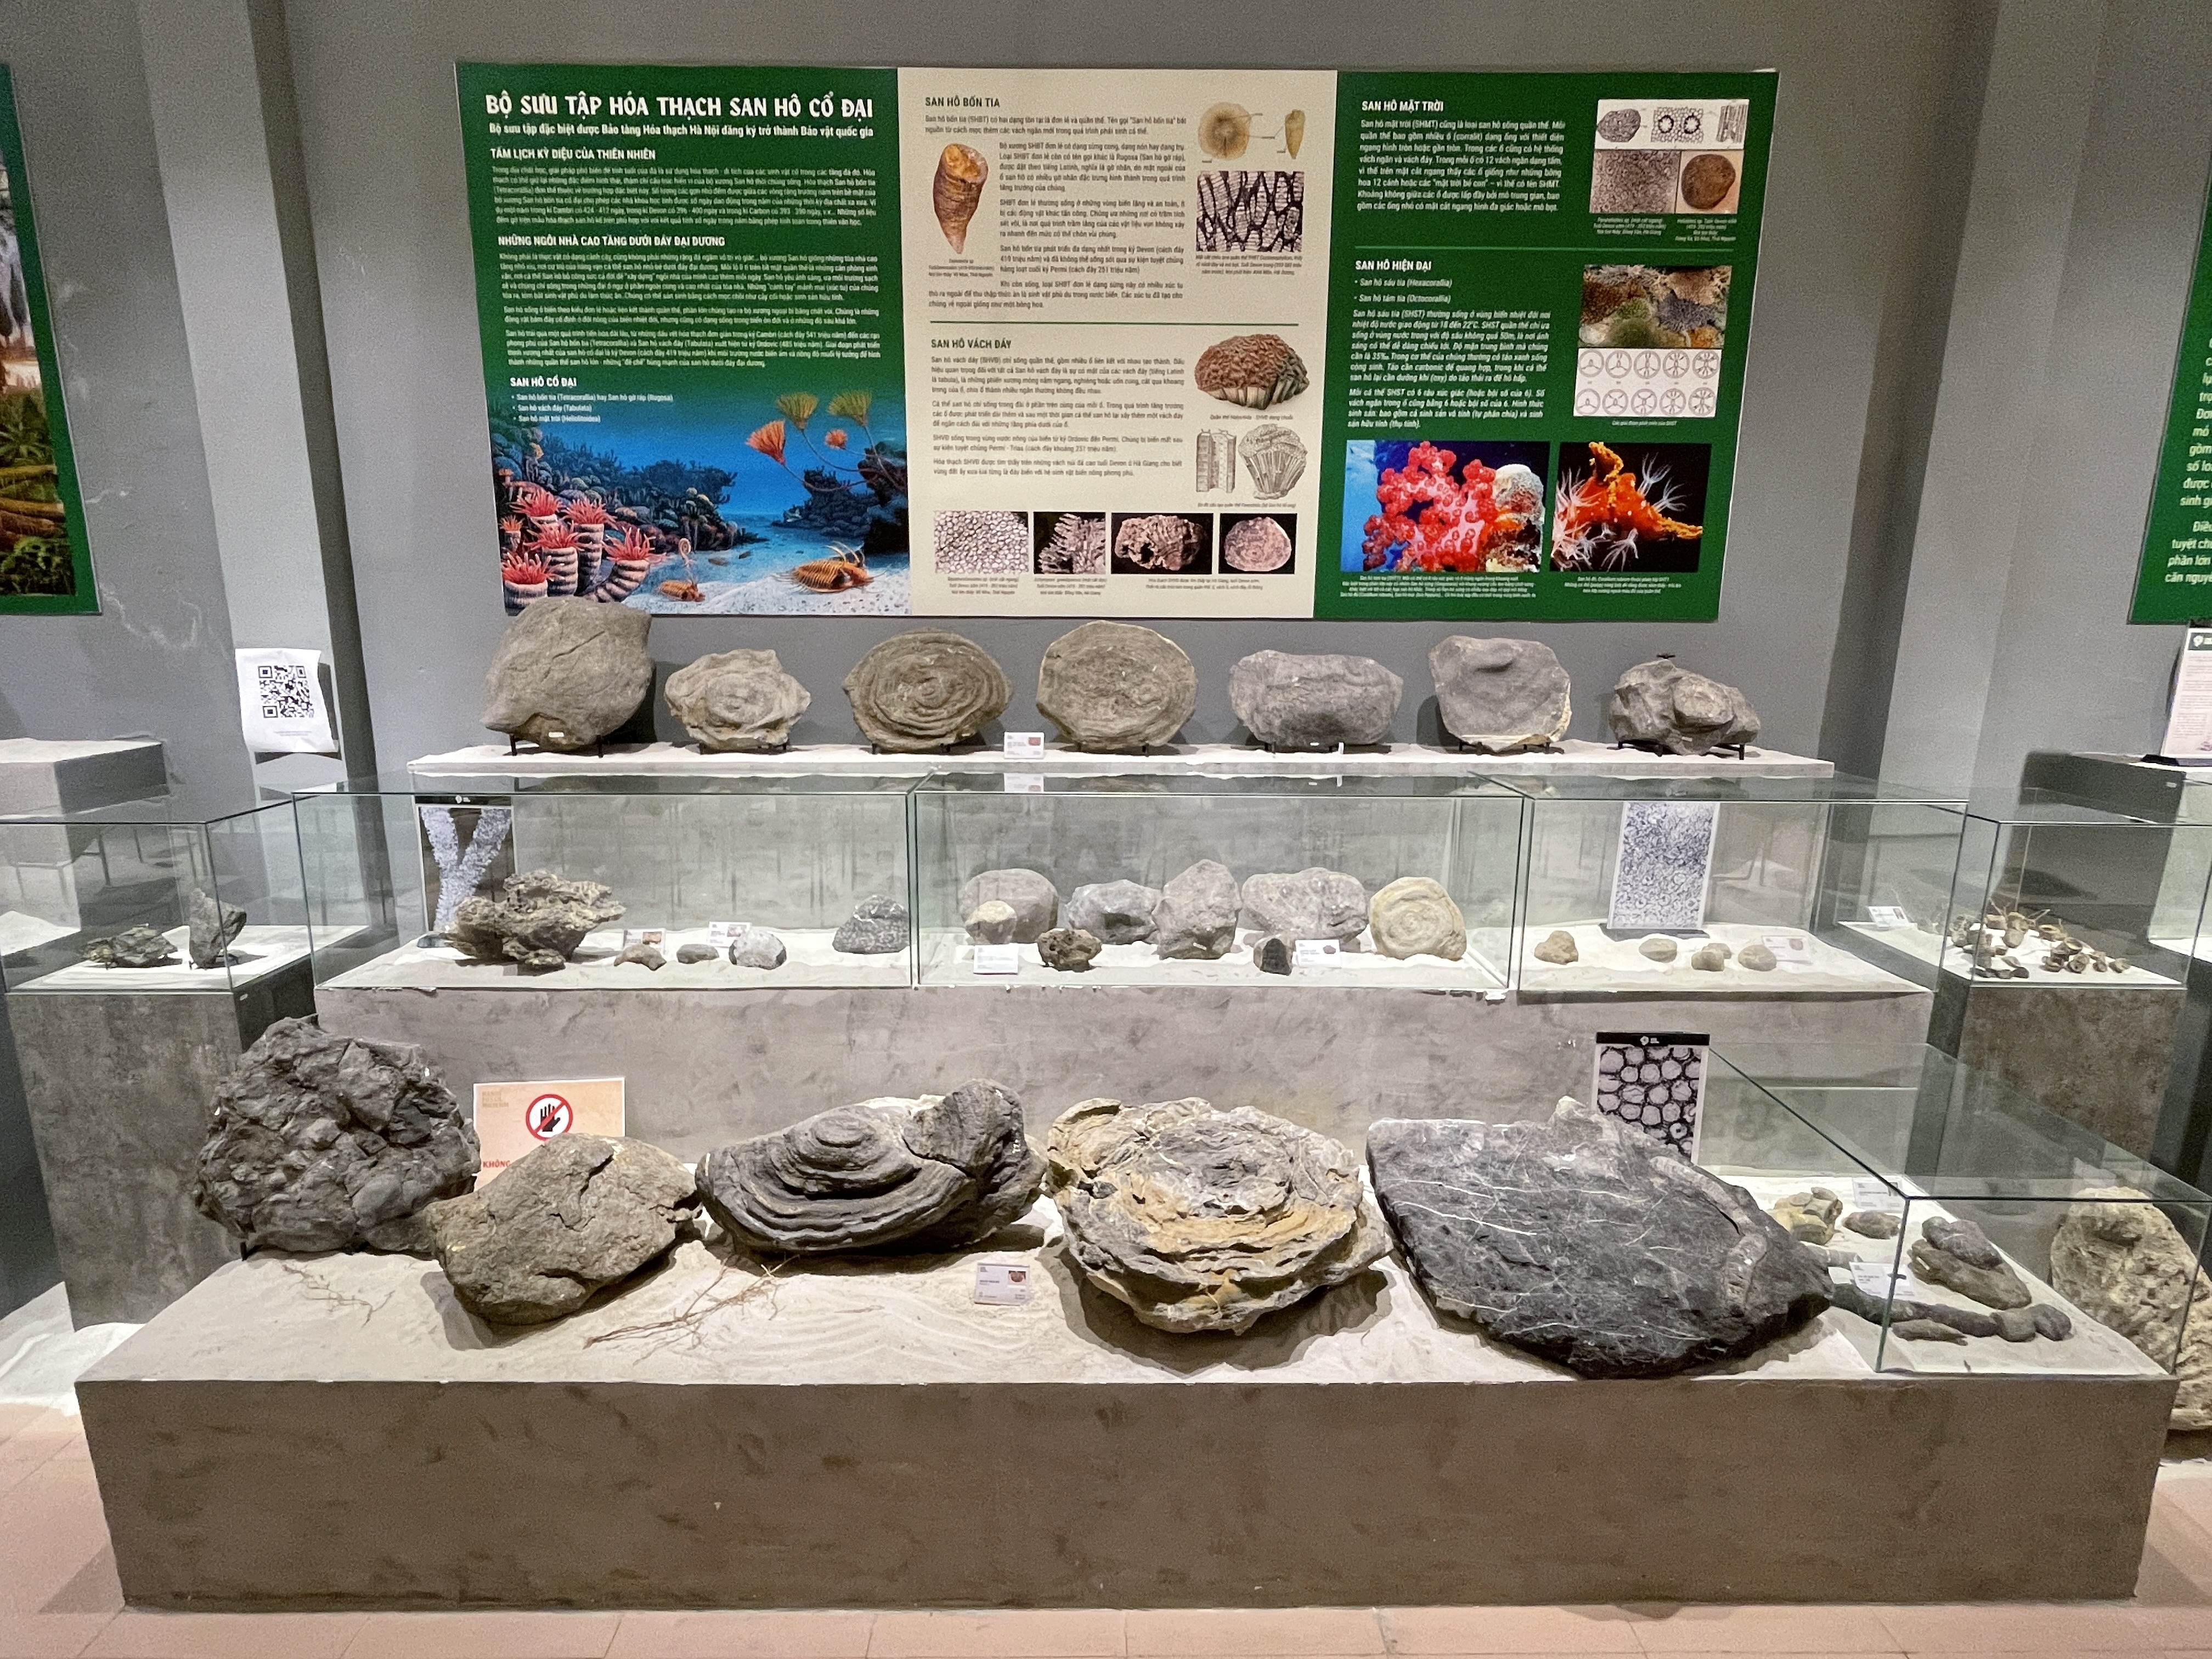 A collection of ancient coral fossils is on display at the venue. Photo: Dong Nguyen / Tuoi Tre News